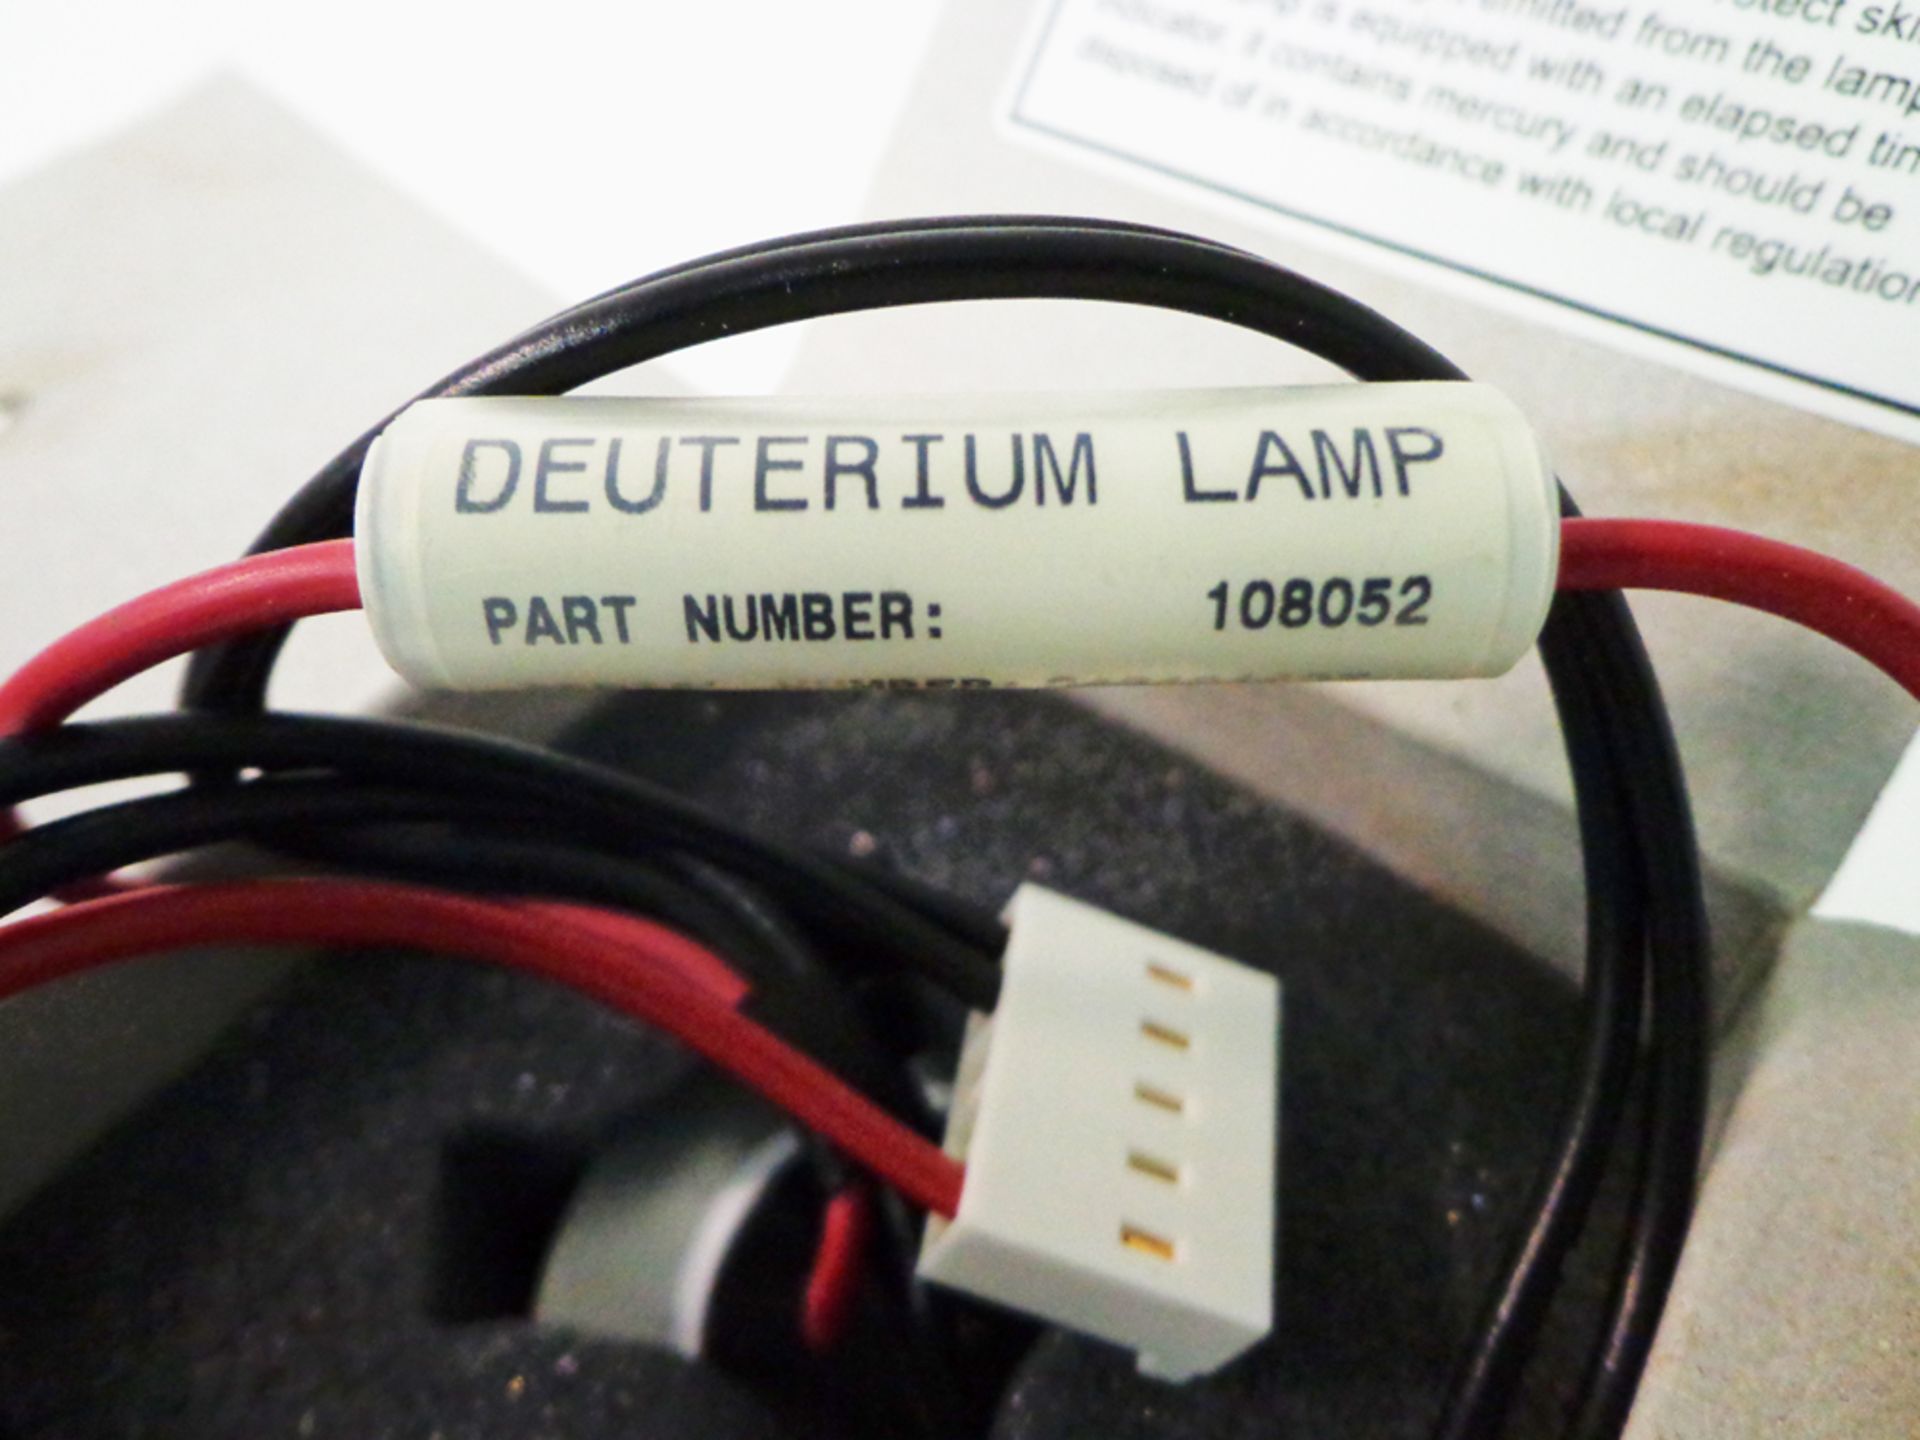 Thermo Scientific Deuterium Lamp Assembly, 108052, S/N 043121407 - Image 2 of 3